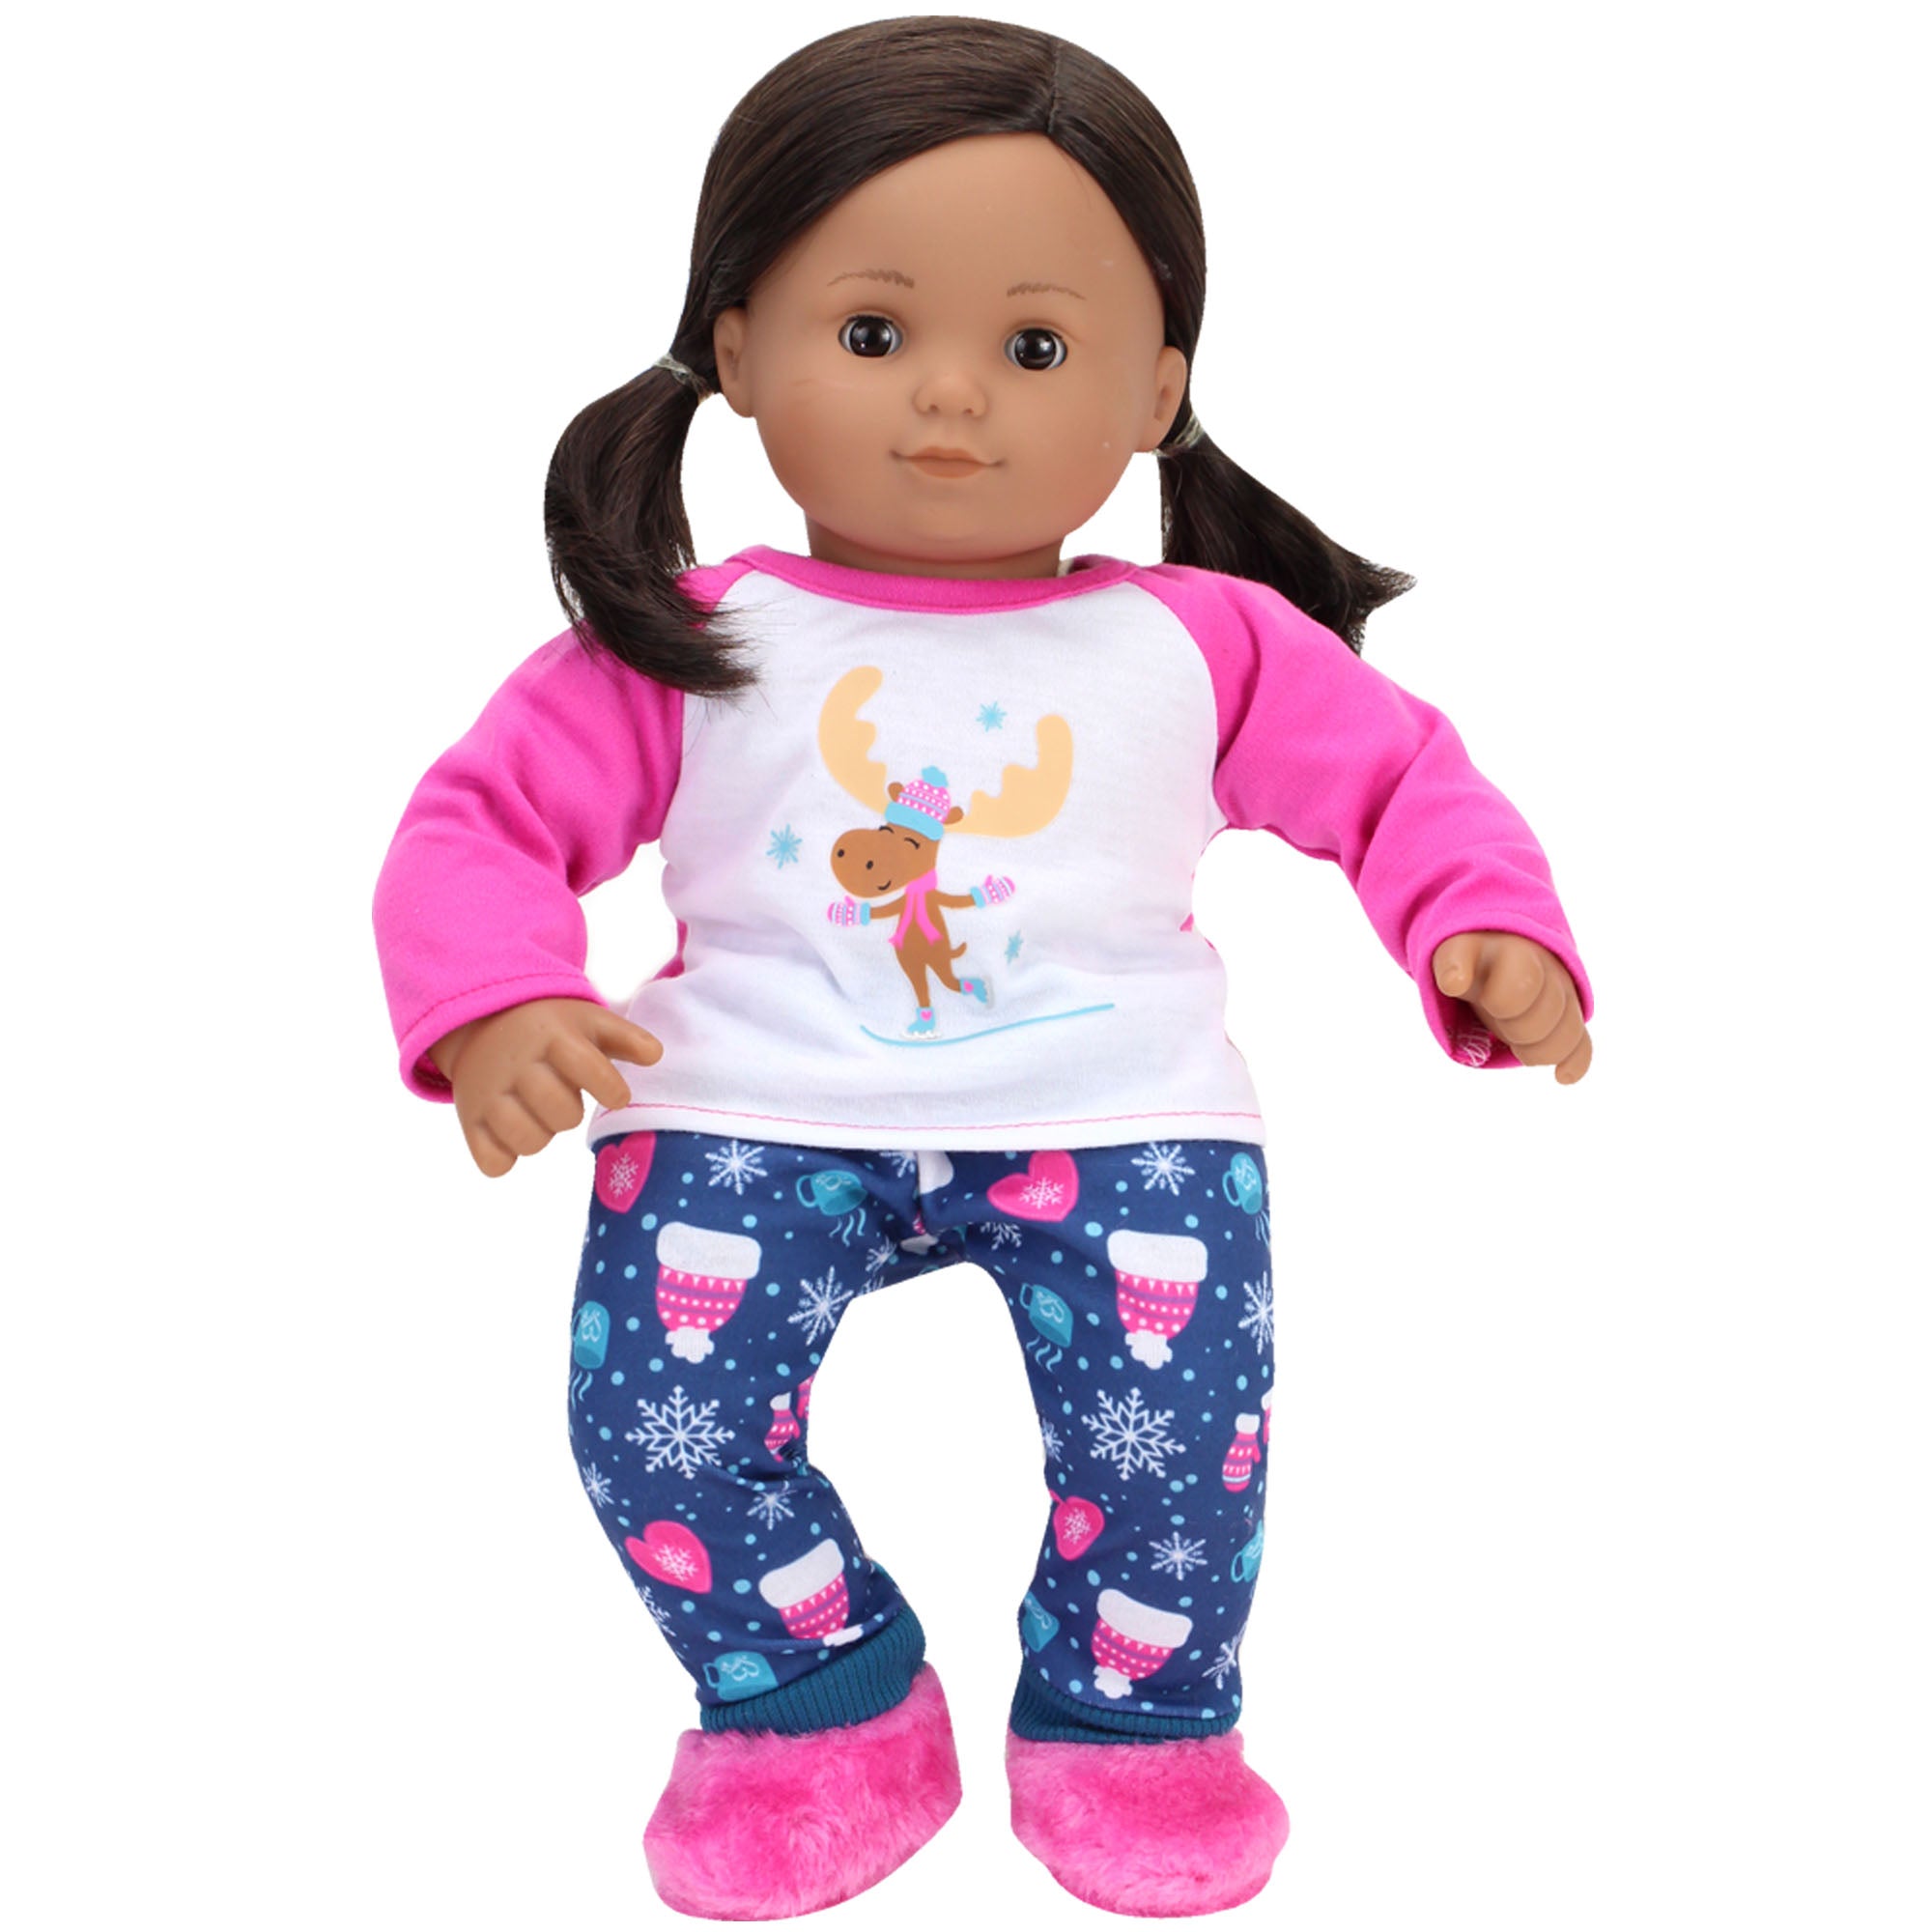 Sophia's Ice Skating Moose Graphic Tee, Winter Print Pajama Pants and Slippers for 15" Baby Dolls, Pink/Blue